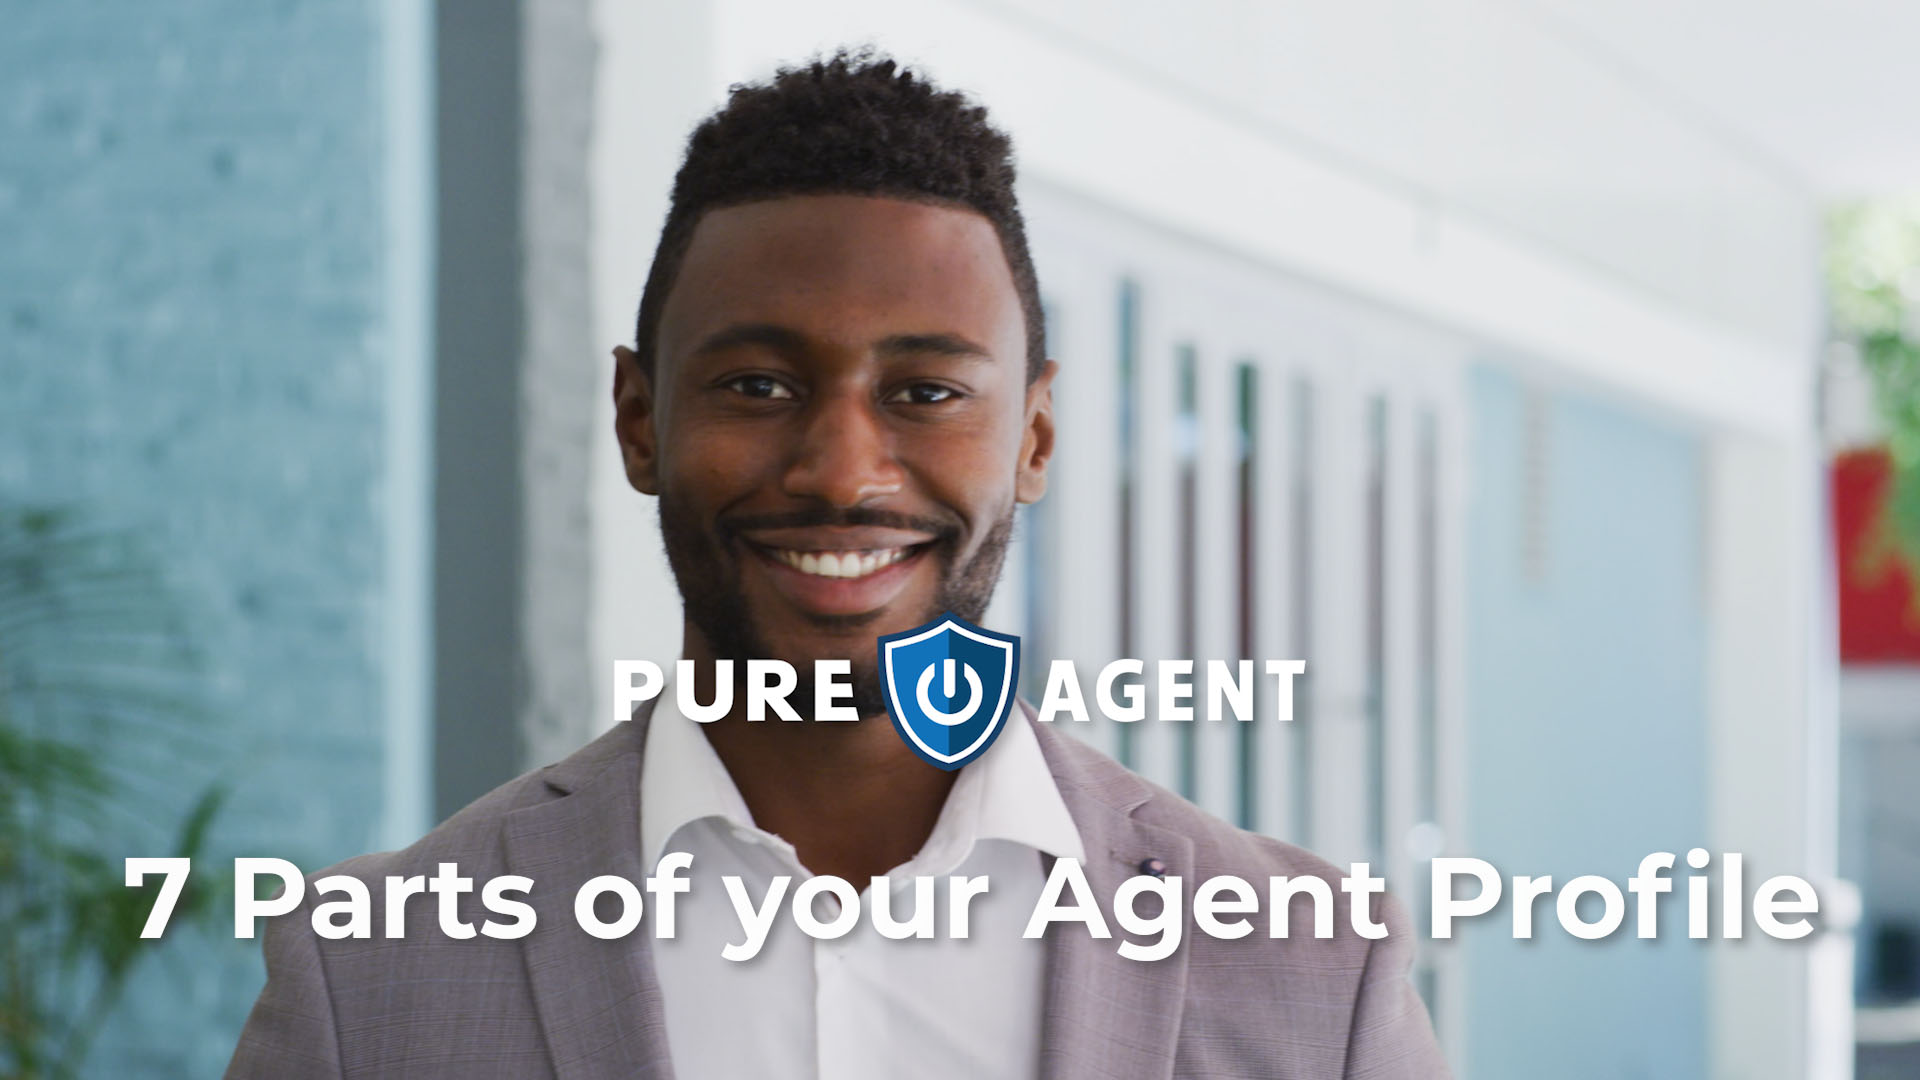 How To Video - 7 Parts of your Agent Profile